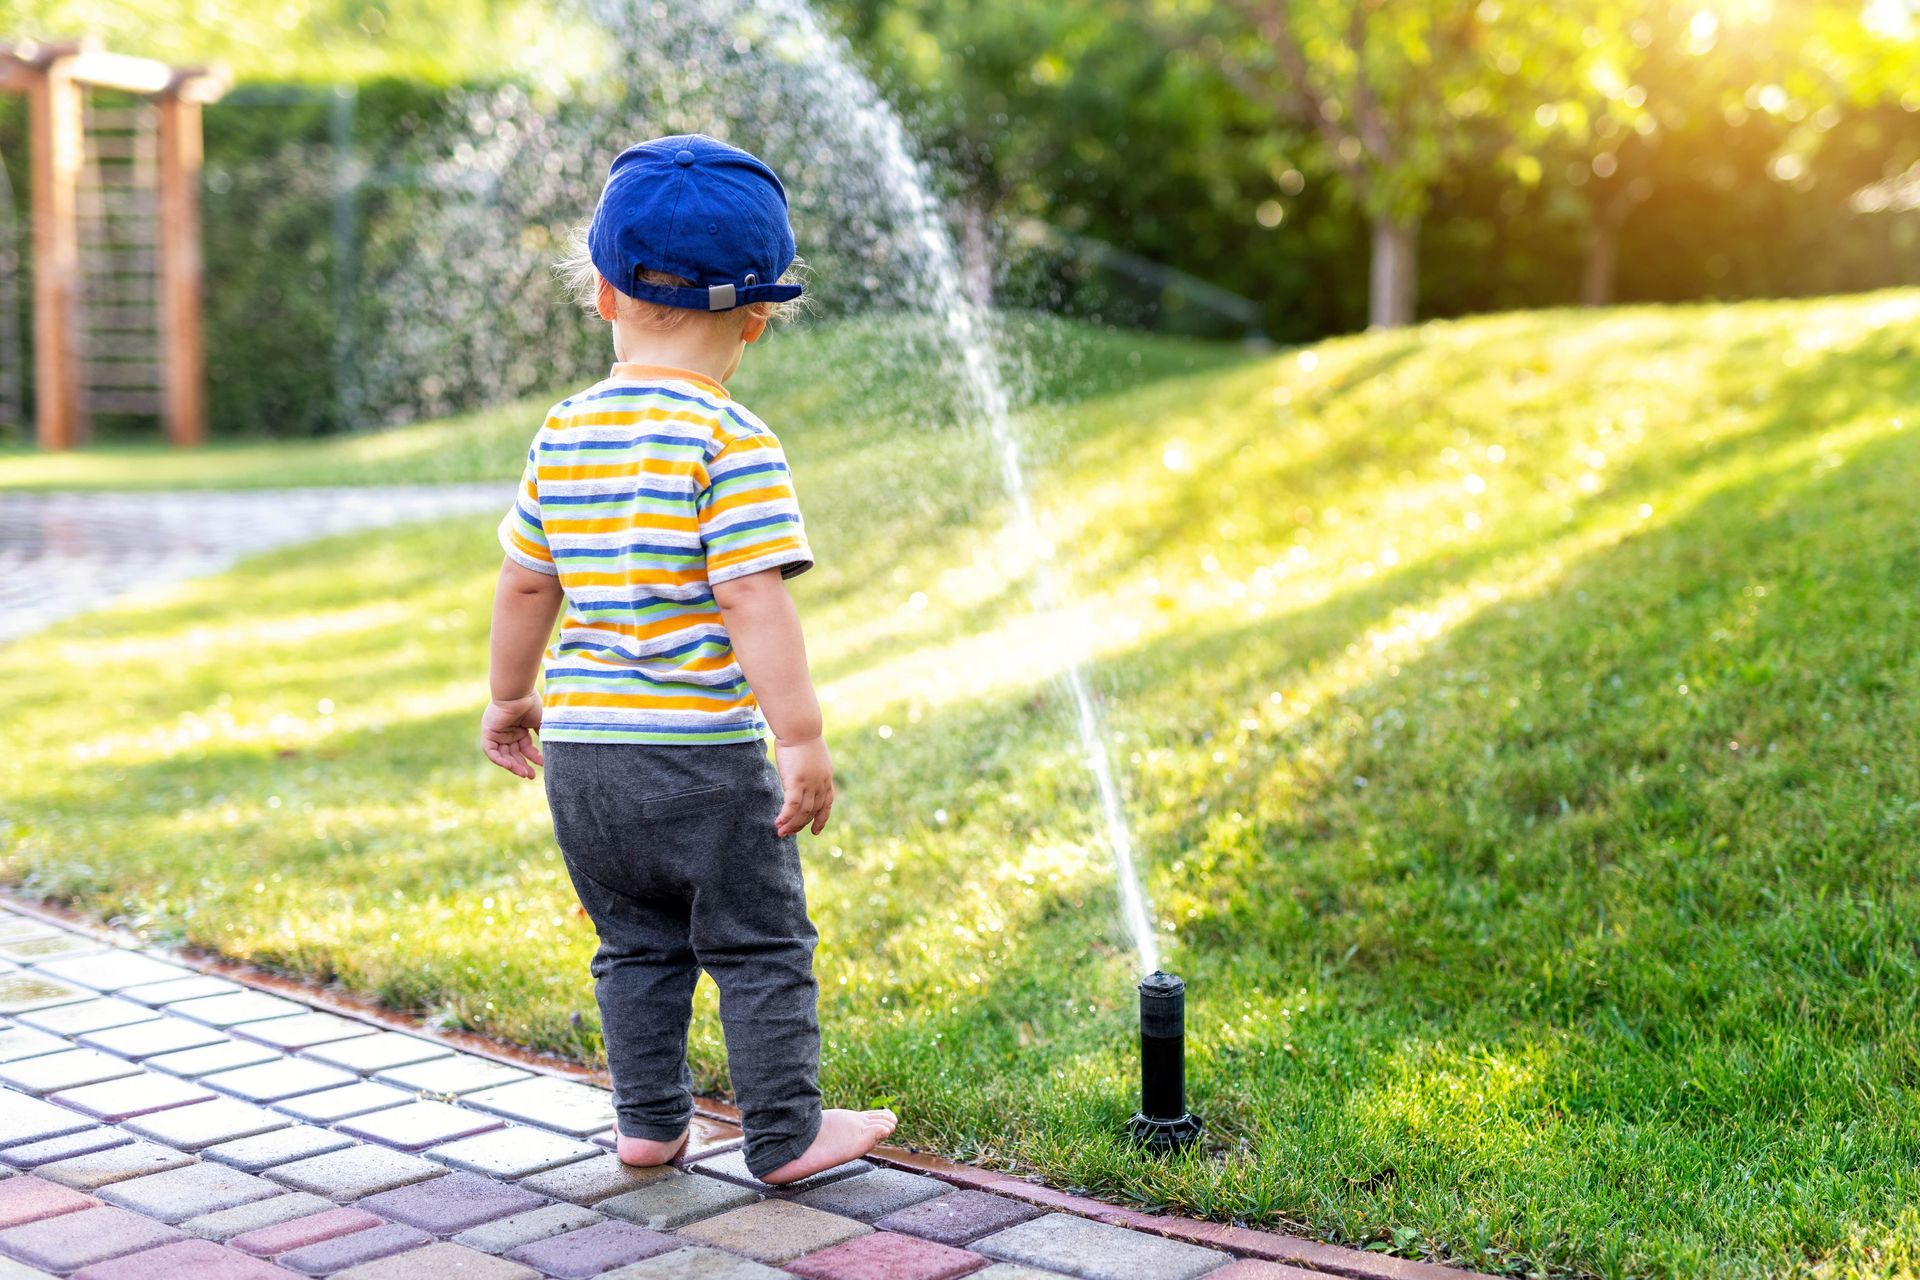 Young boy playing in Southwest Florida irrigation system